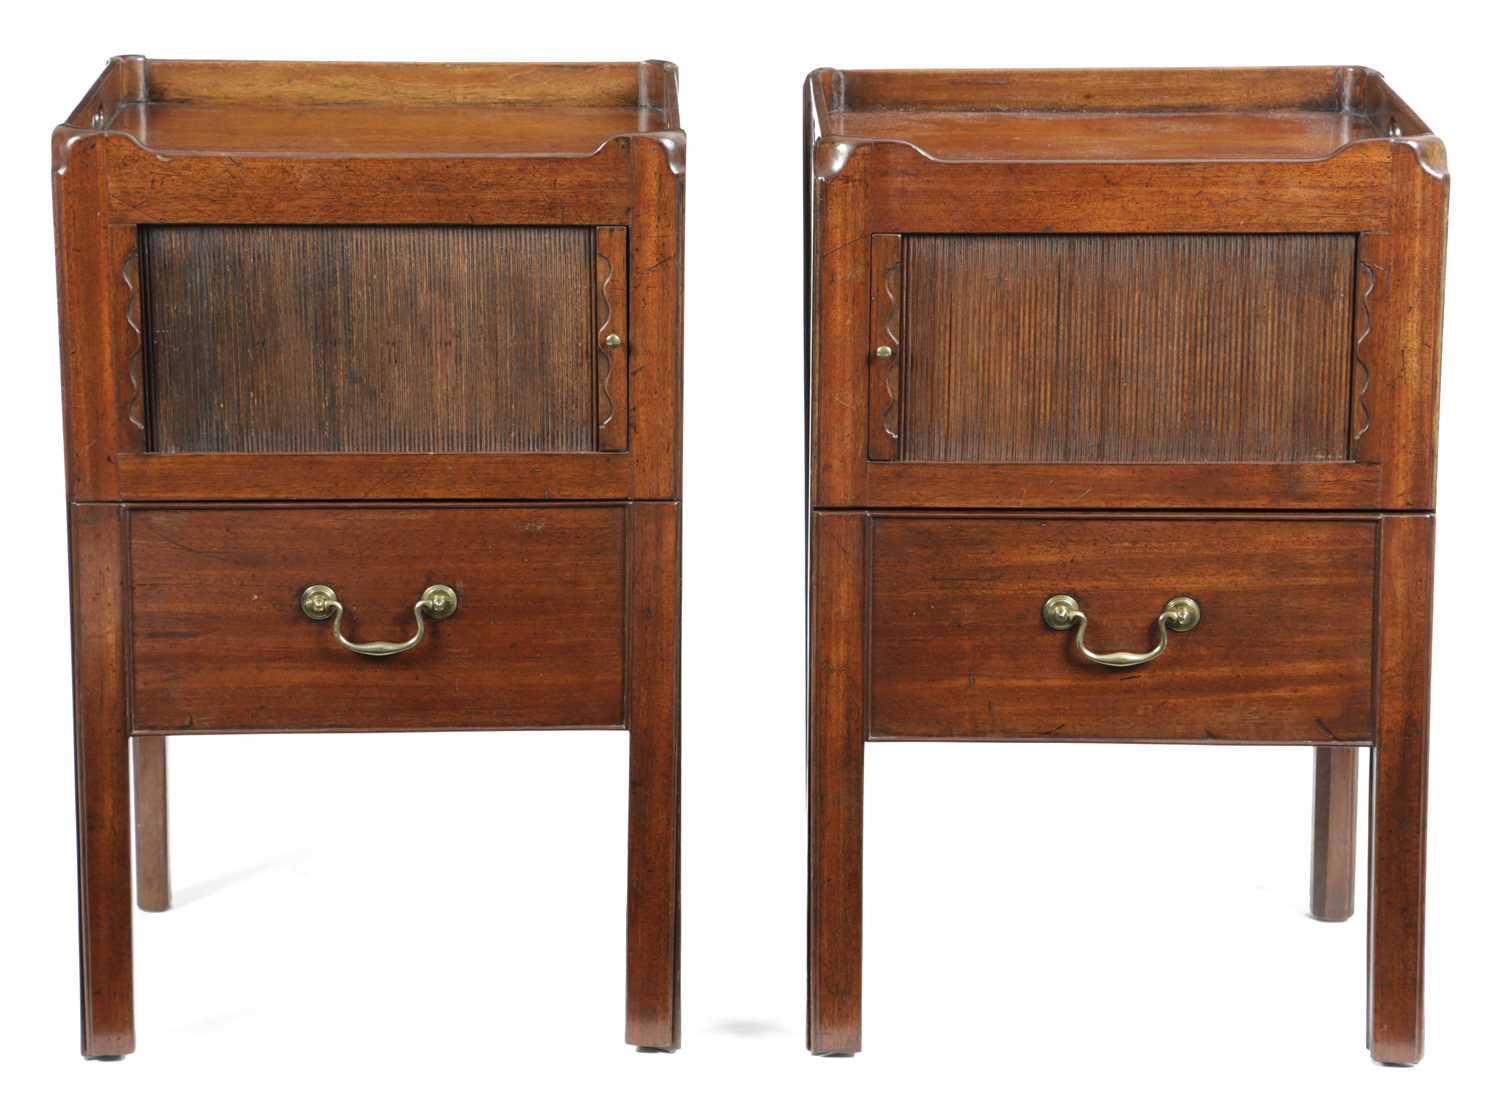 A NEAR PAIR OF GEORGE III MAHOGANY TRAY-TOP BEDSIDE COMMODES SHERATON PERIOD, C.1780-90 each with